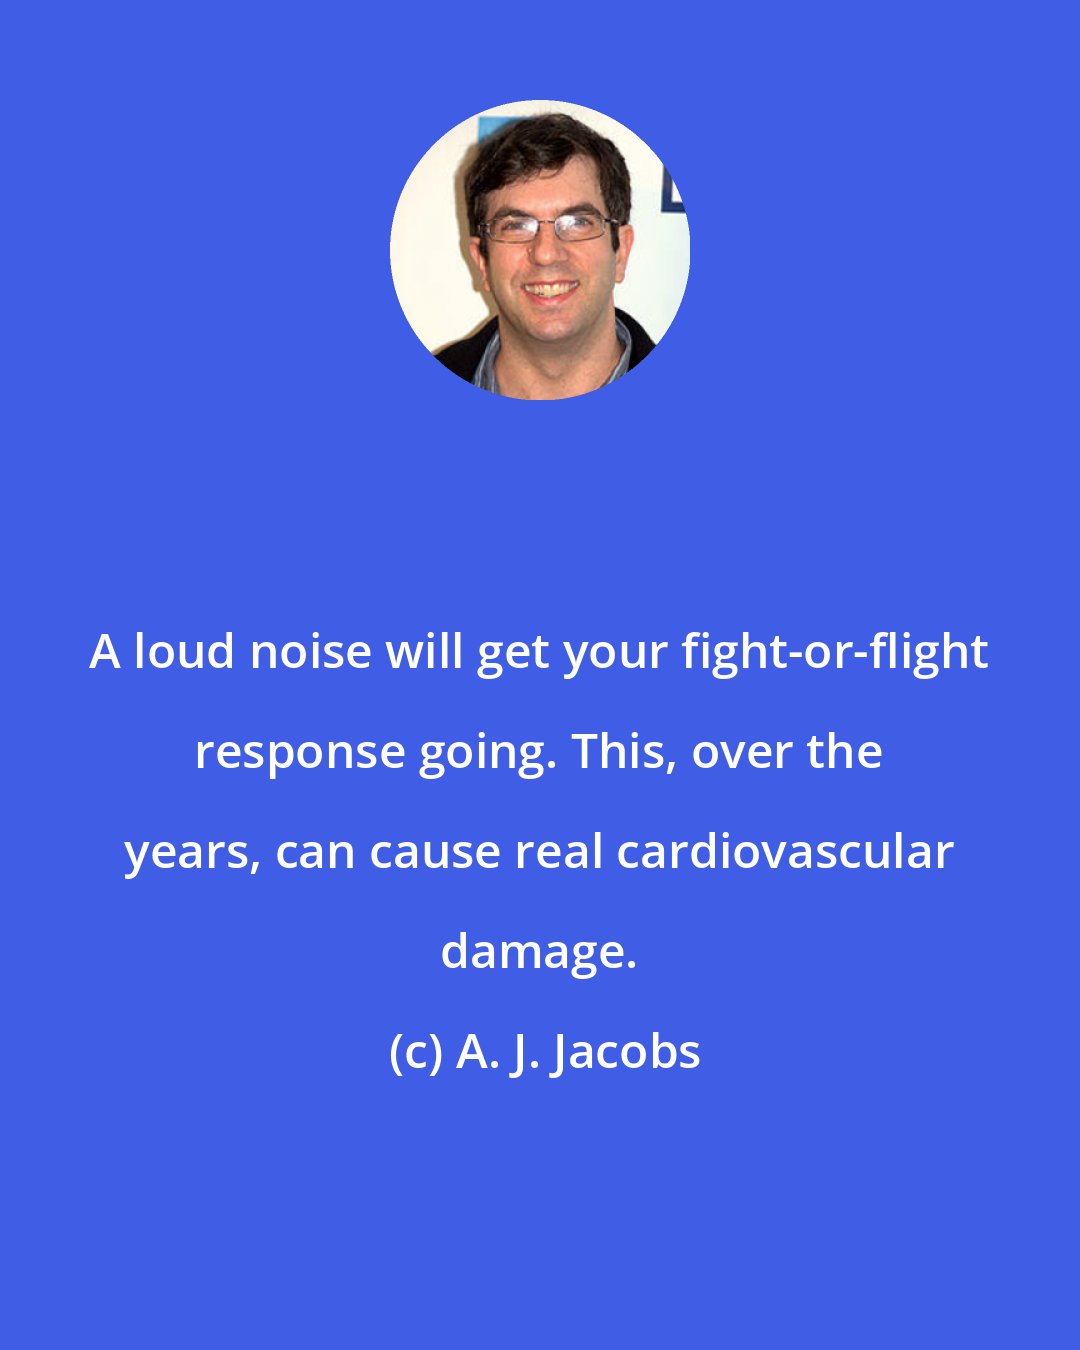 A. J. Jacobs: A loud noise will get your fight-or-flight response going. This, over the years, can cause real cardiovascular damage.